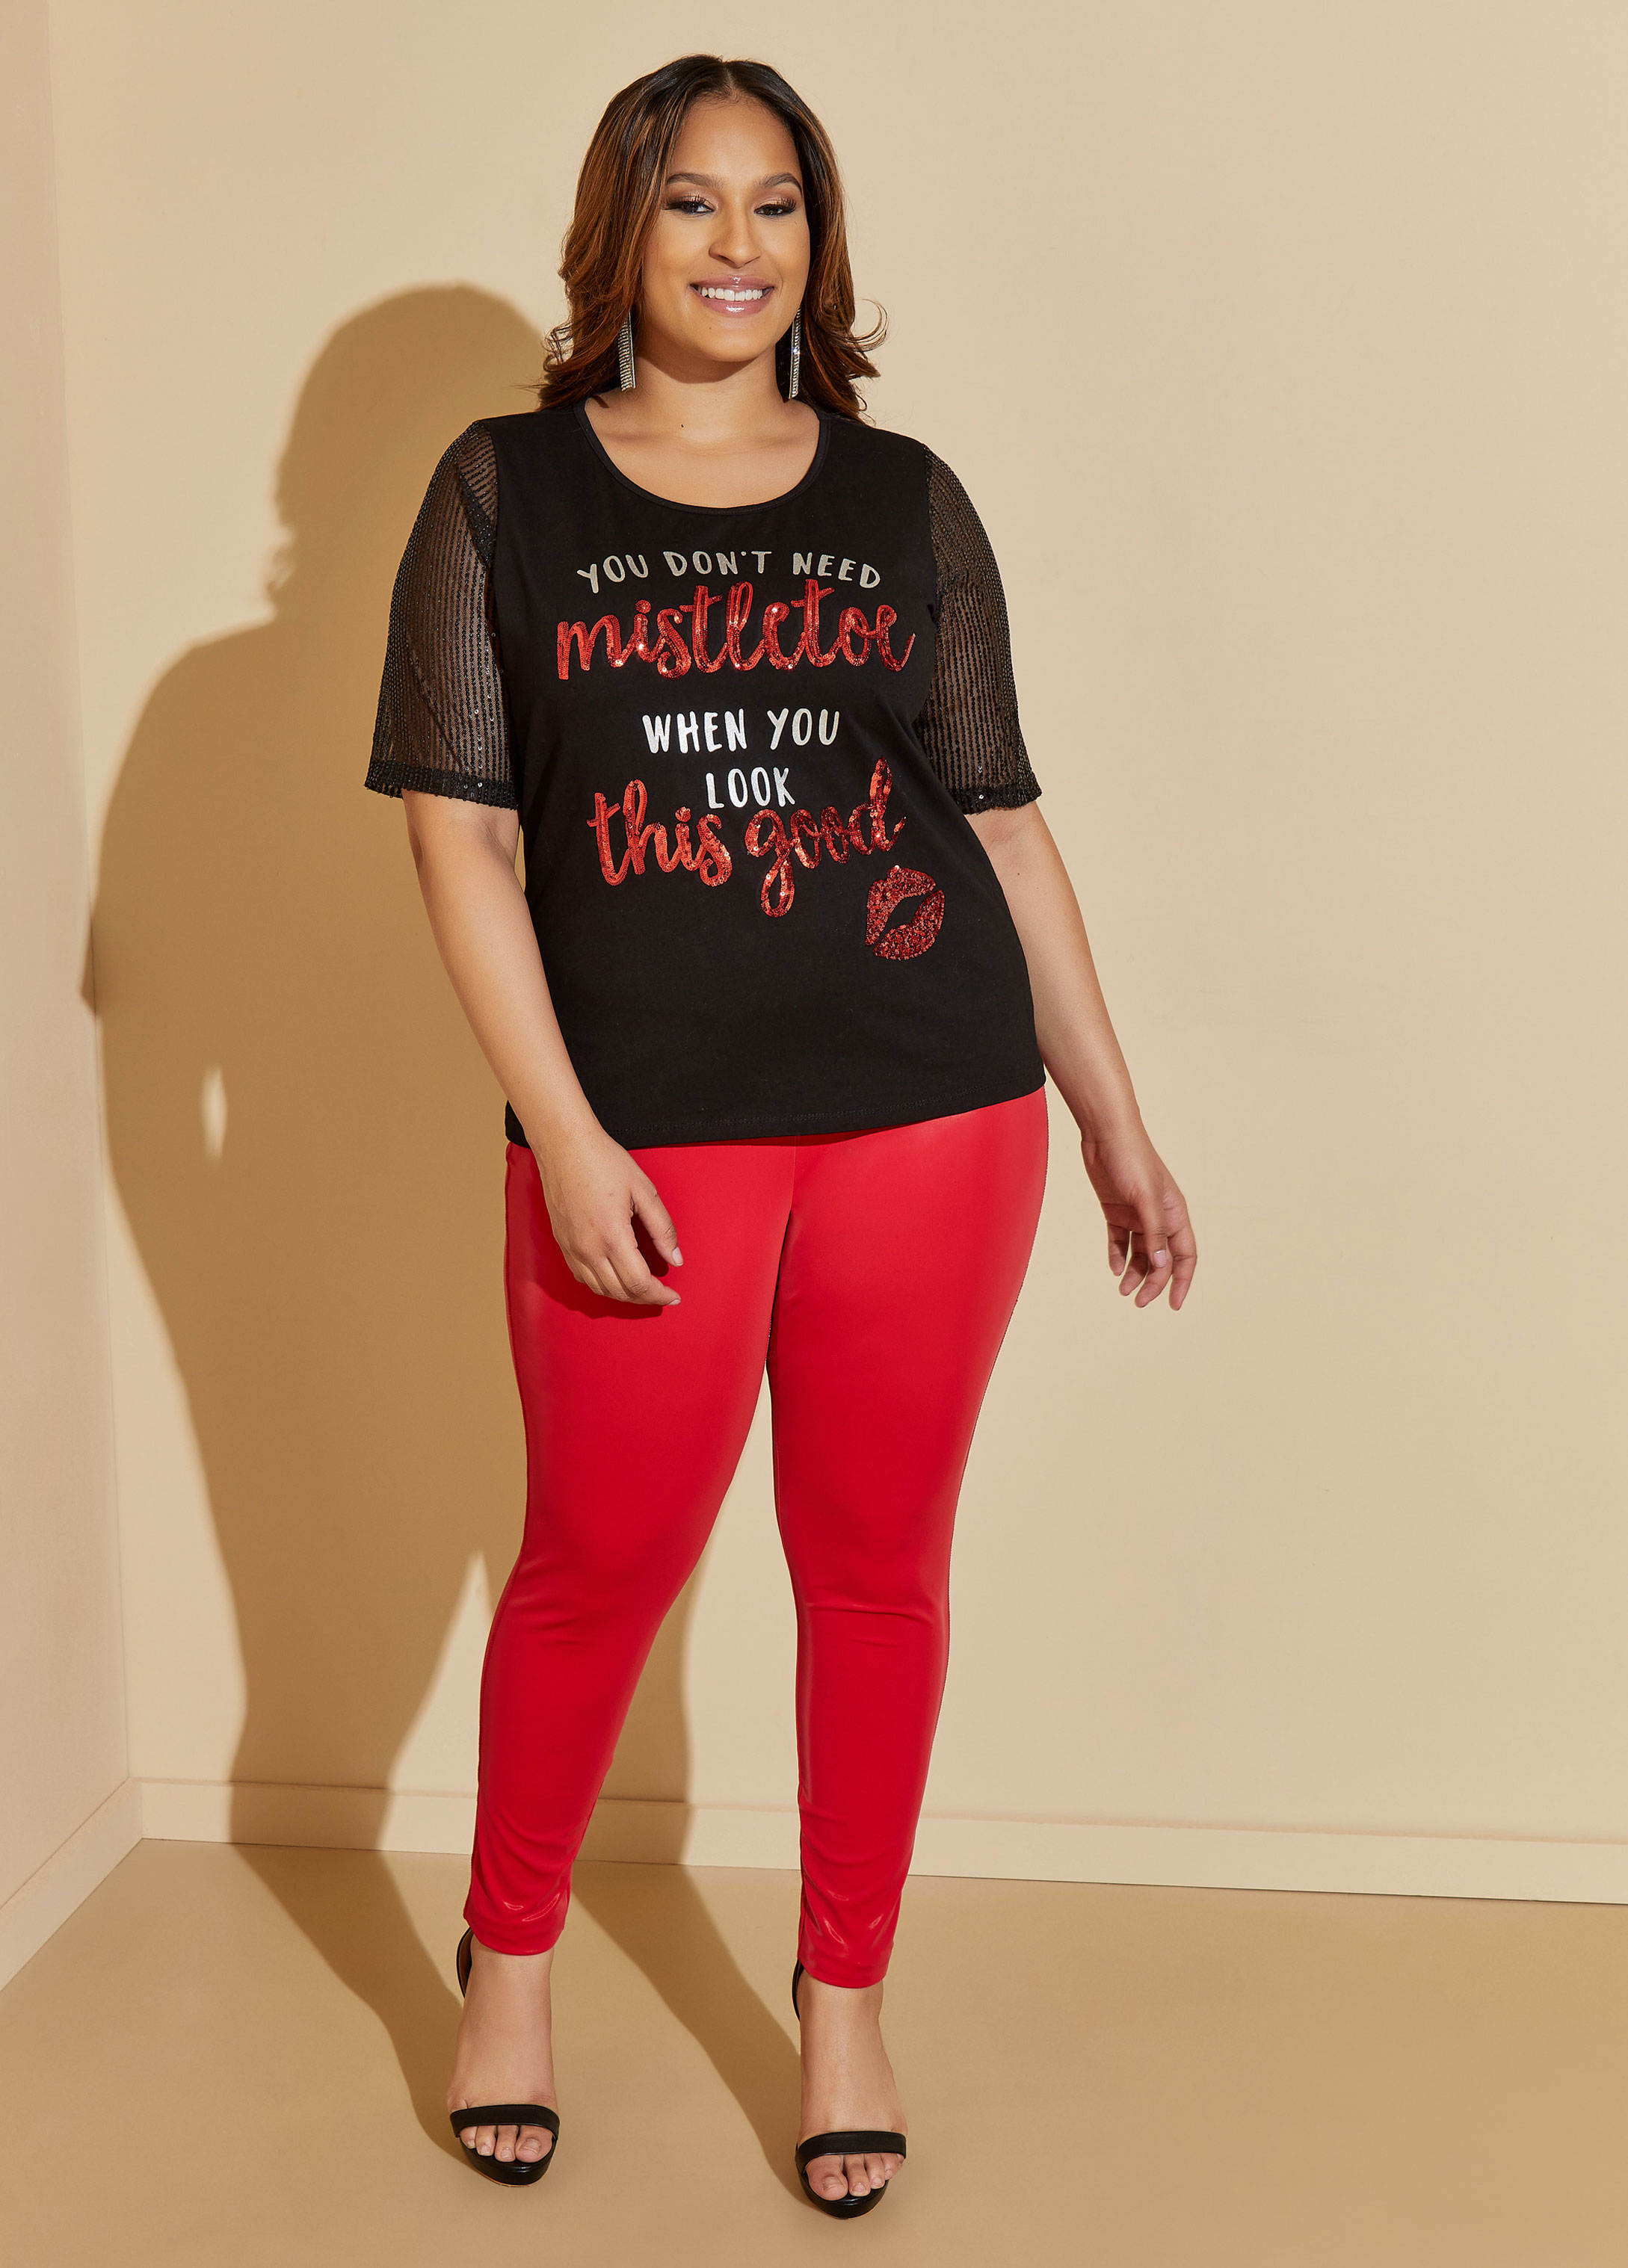 Plus Size tee plus size t-shirt holiday plus size graphic tee